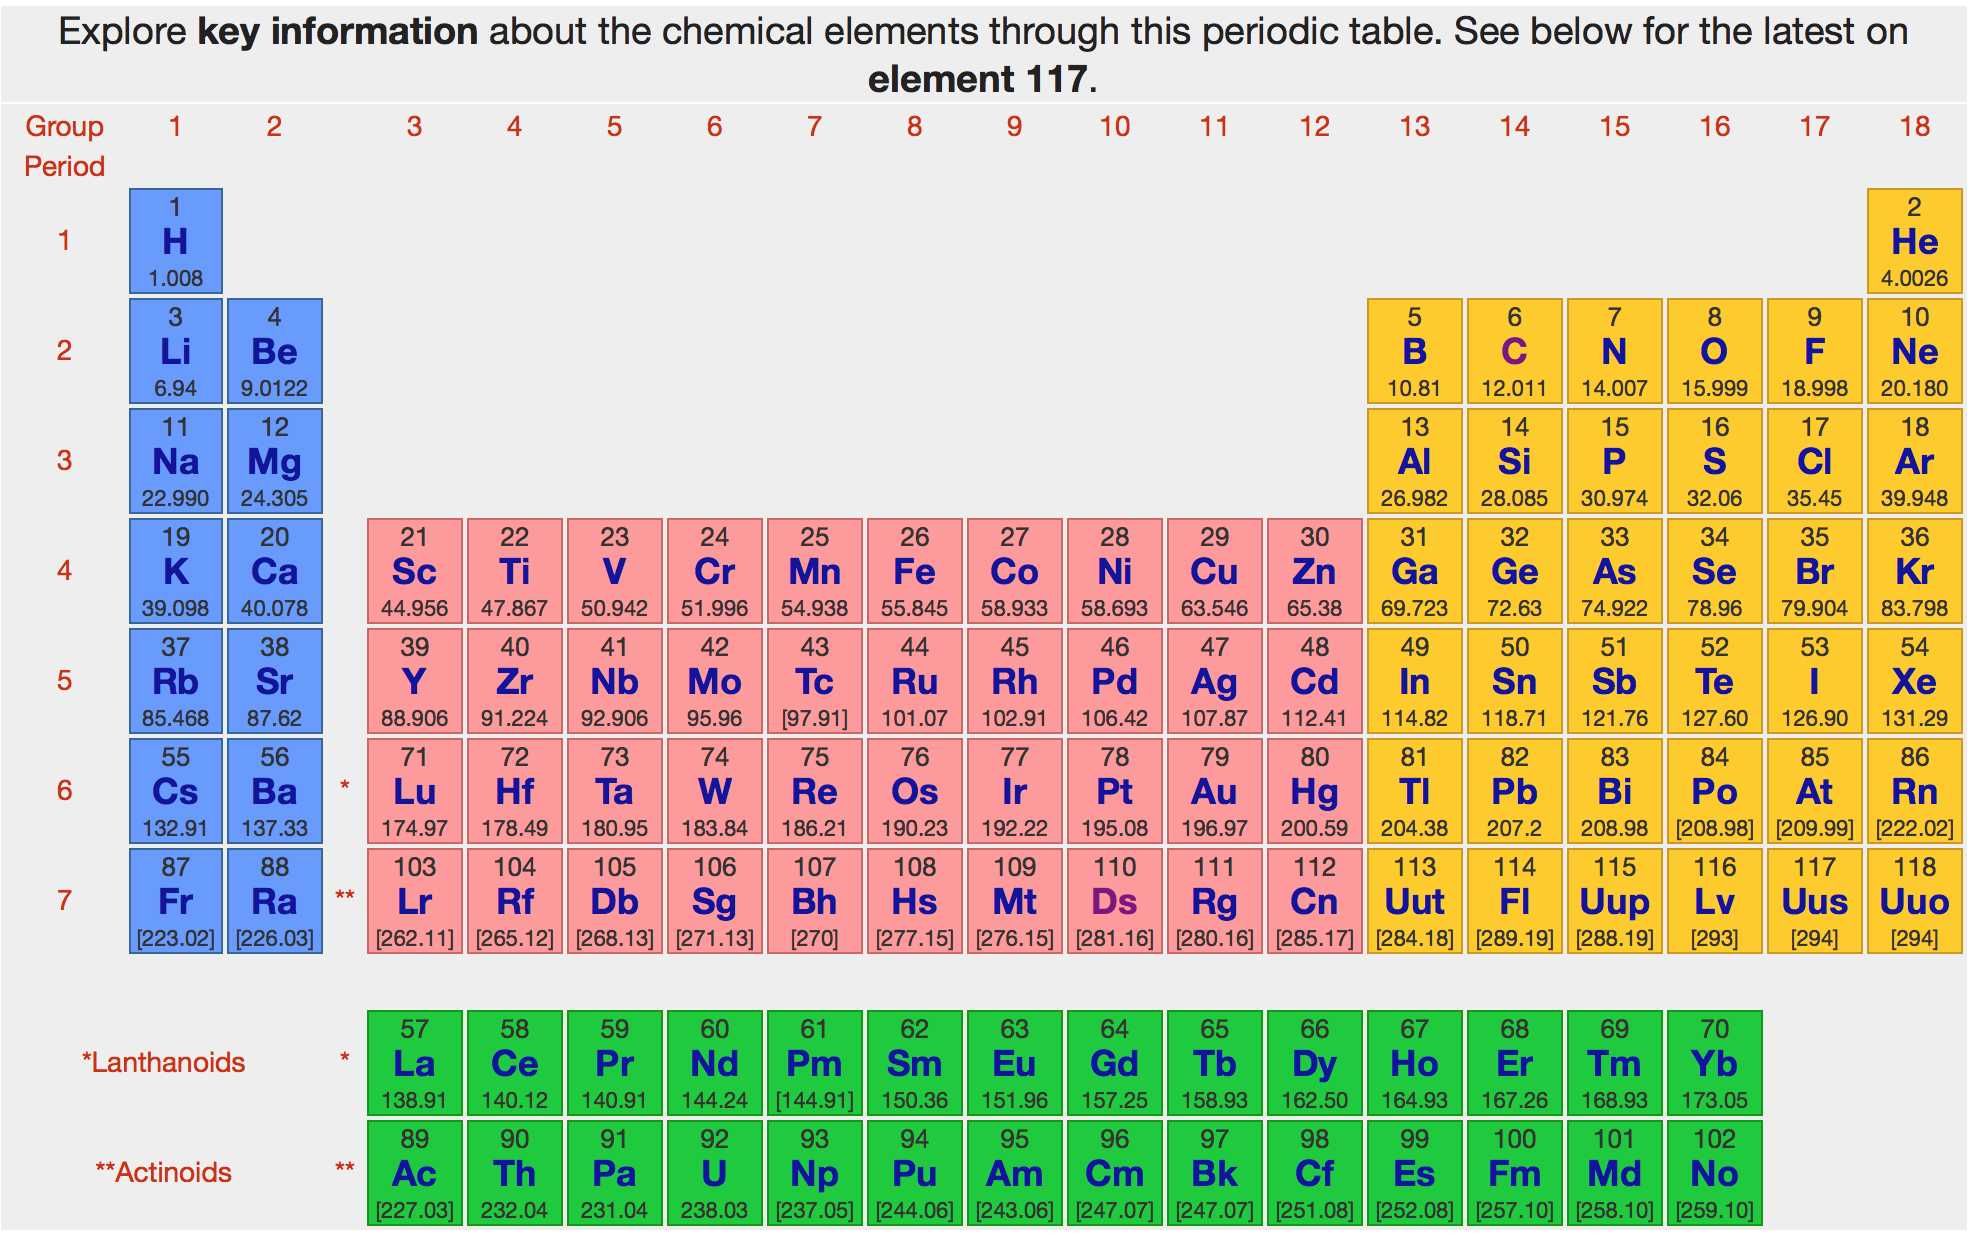 Isotope Practice Worksheet together with there are Many Interactive Periodic Tables Out there but This is